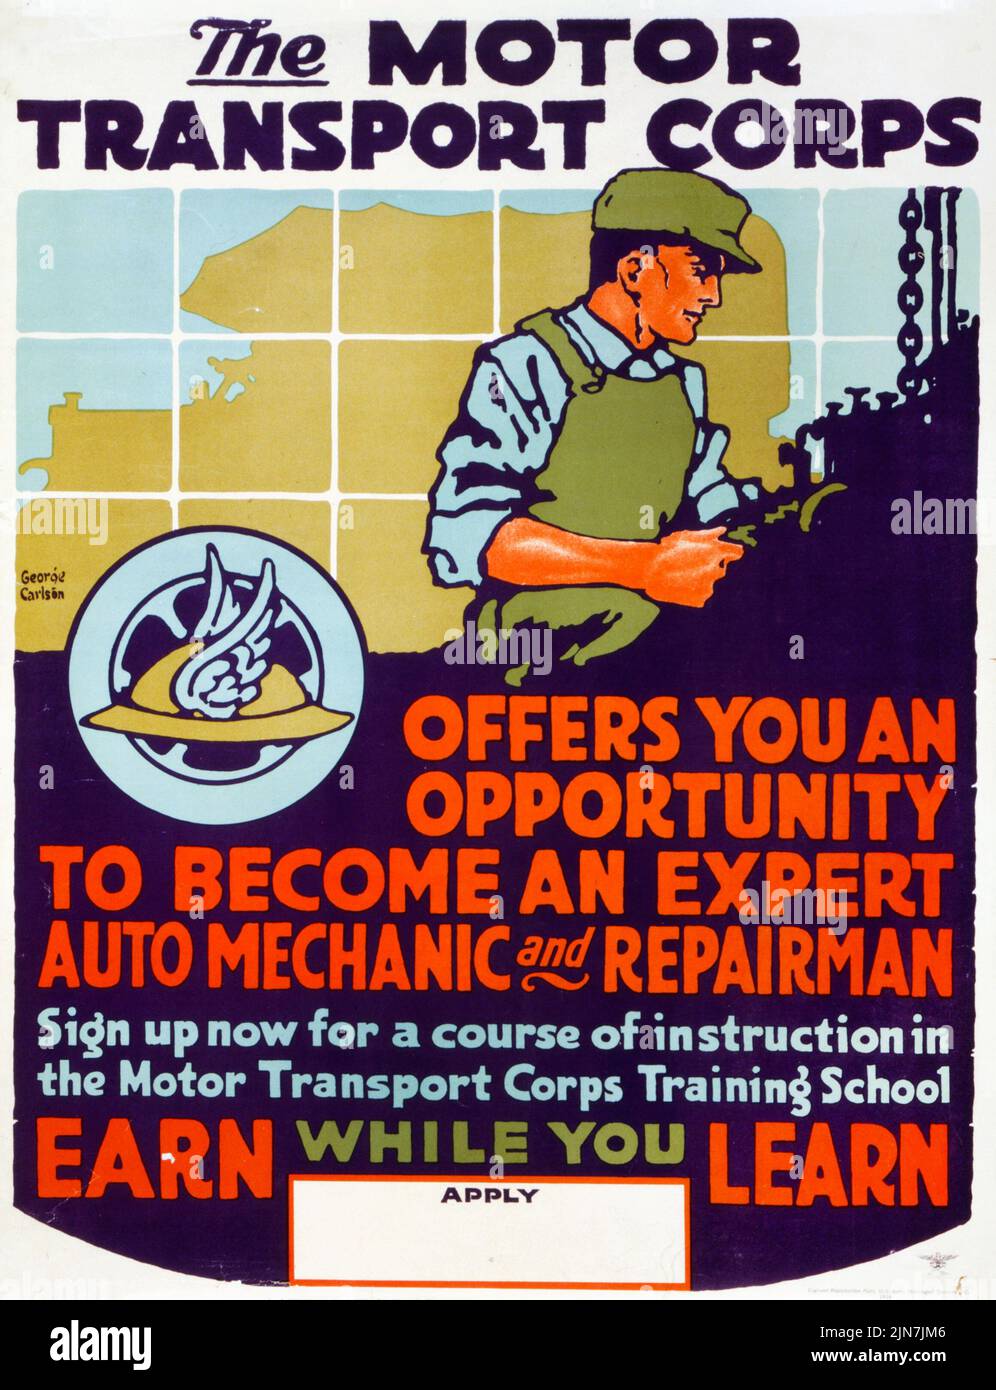 The Motor Transport Corps offers you an opportunity to become an expert auto mechanic and repairman, Earn while you learn (1919) American Post-World War I era poster by George Carlson Stock Photo